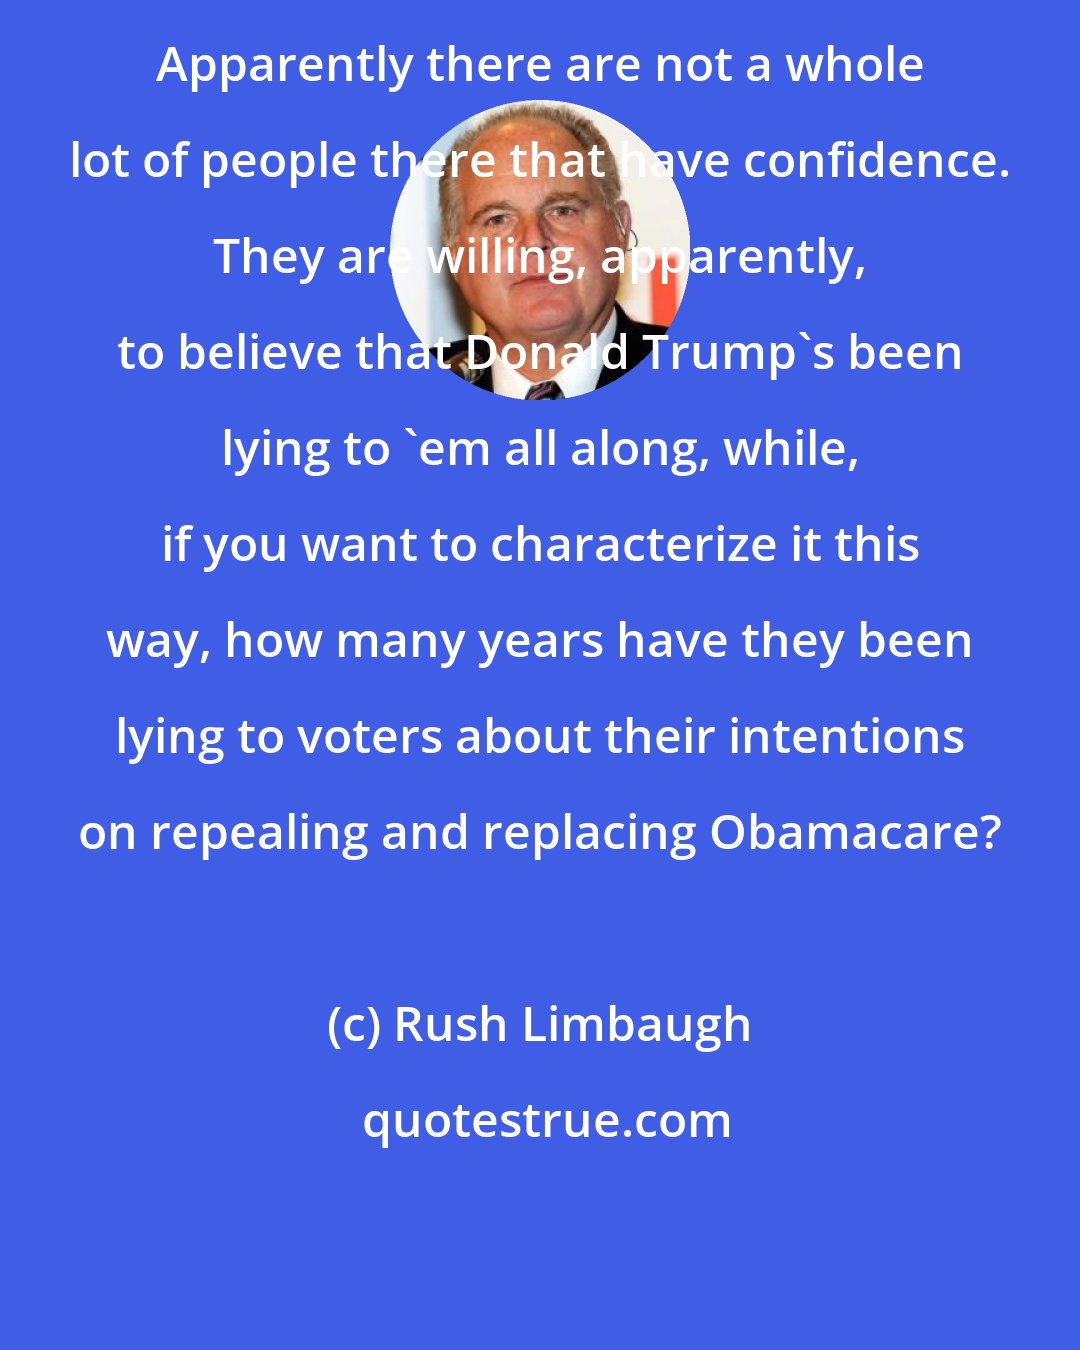 Rush Limbaugh: Apparently there are not a whole lot of people there that have confidence. They are willing, apparently, to believe that Donald Trump's been lying to 'em all along, while, if you want to characterize it this way, how many years have they been lying to voters about their intentions on repealing and replacing Obamacare?